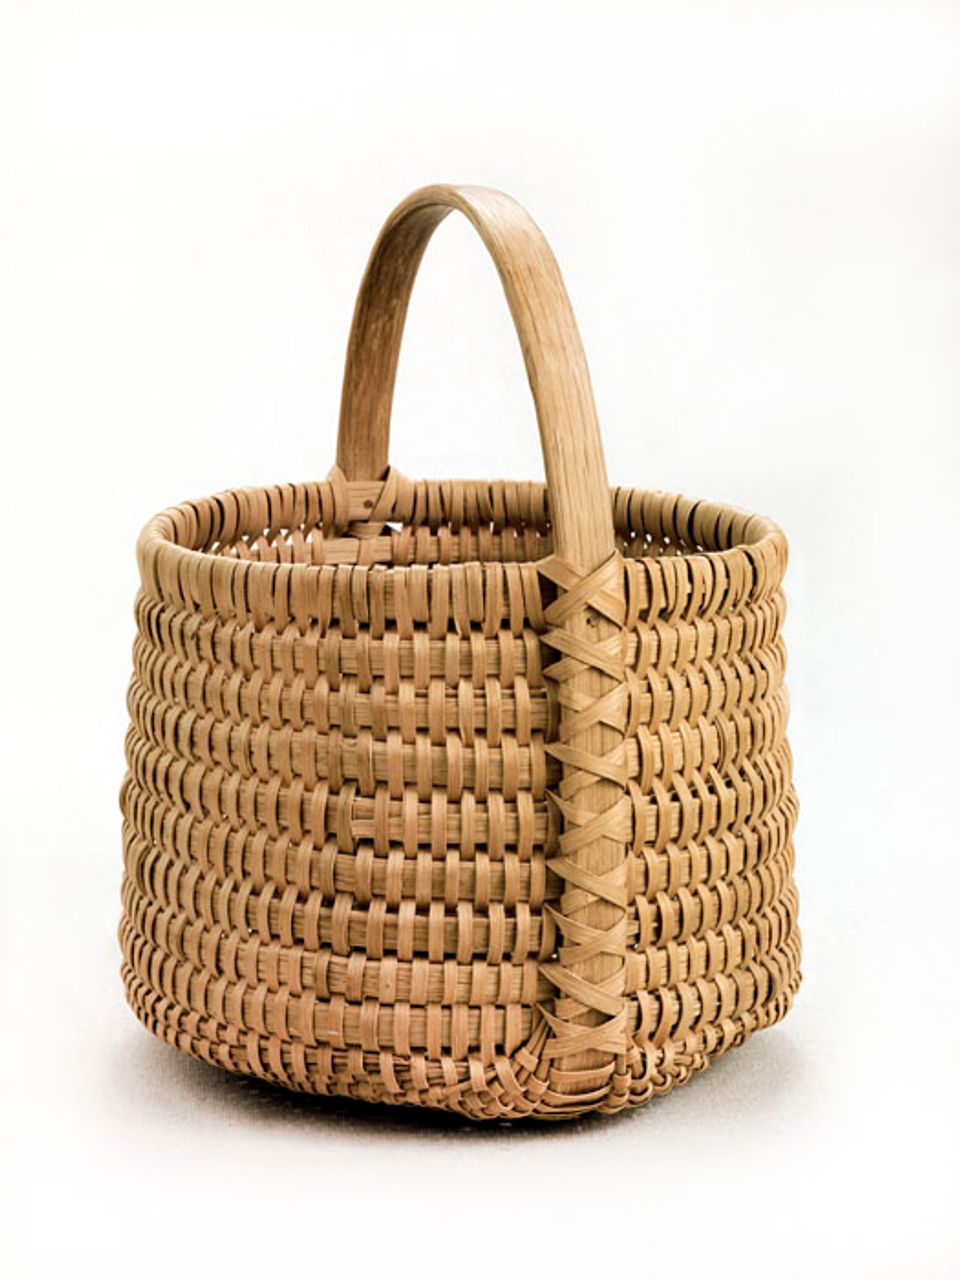 A basket that's small and deep with a circular shape and a handle.